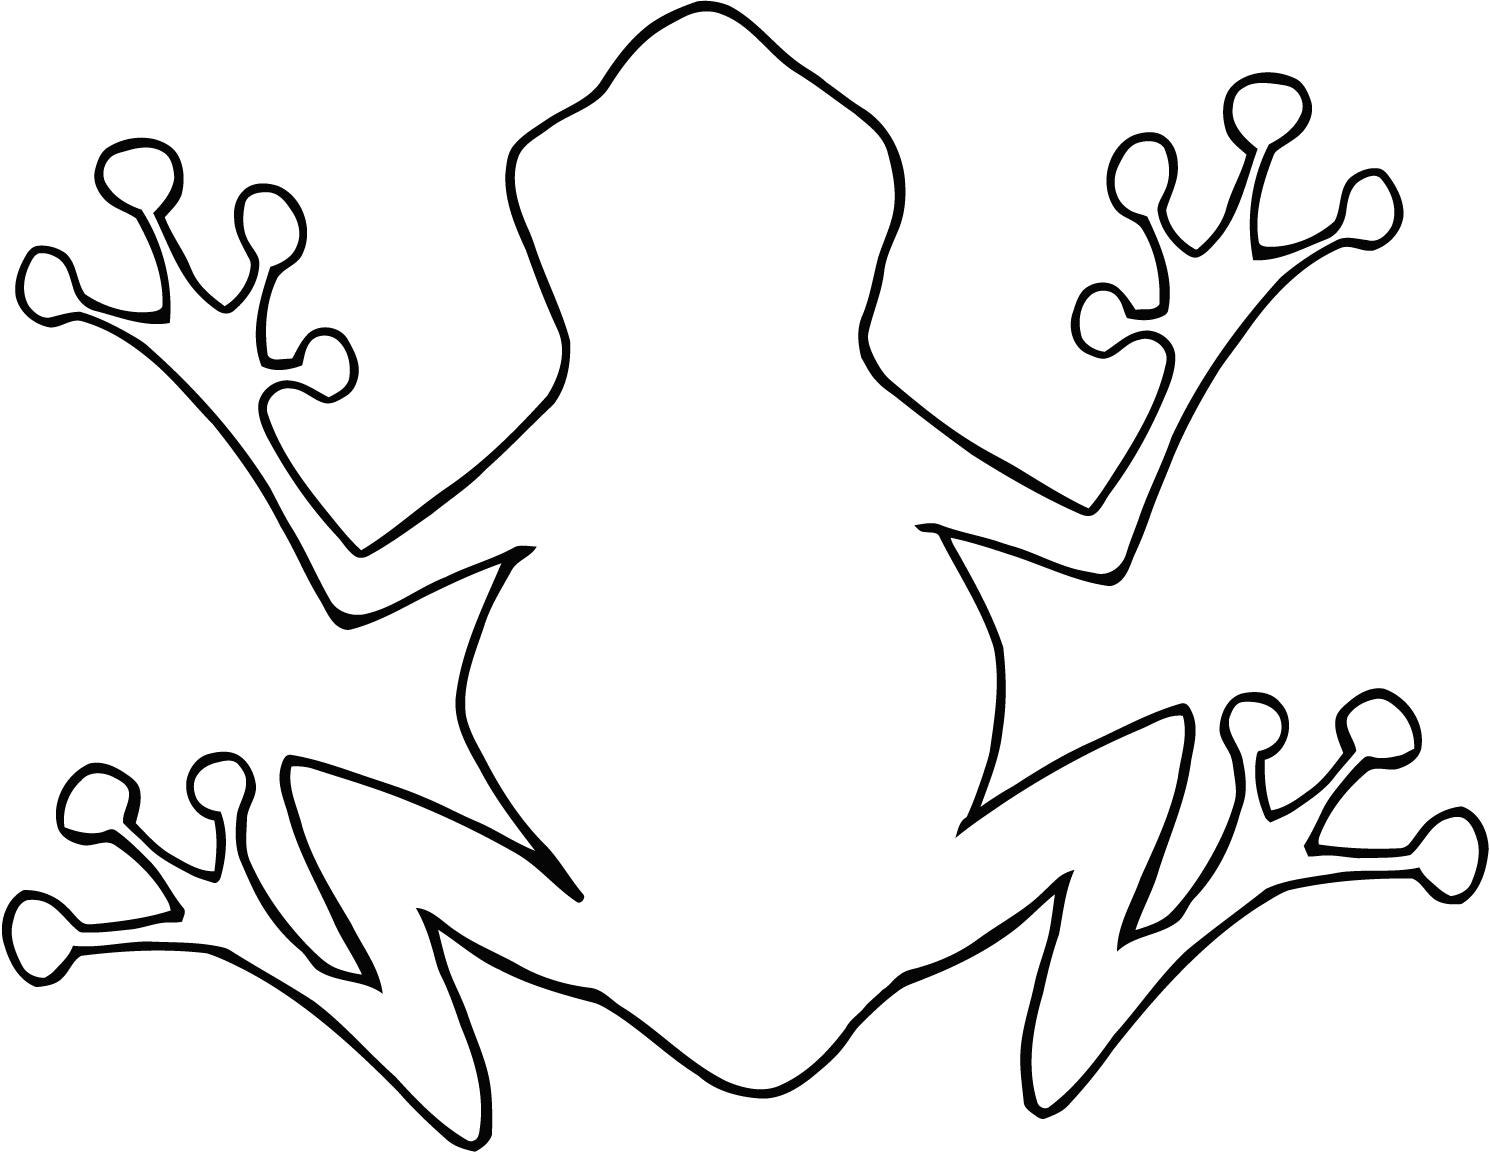 coloring sheet of cartoon outline frog for kids - Coloring Point 